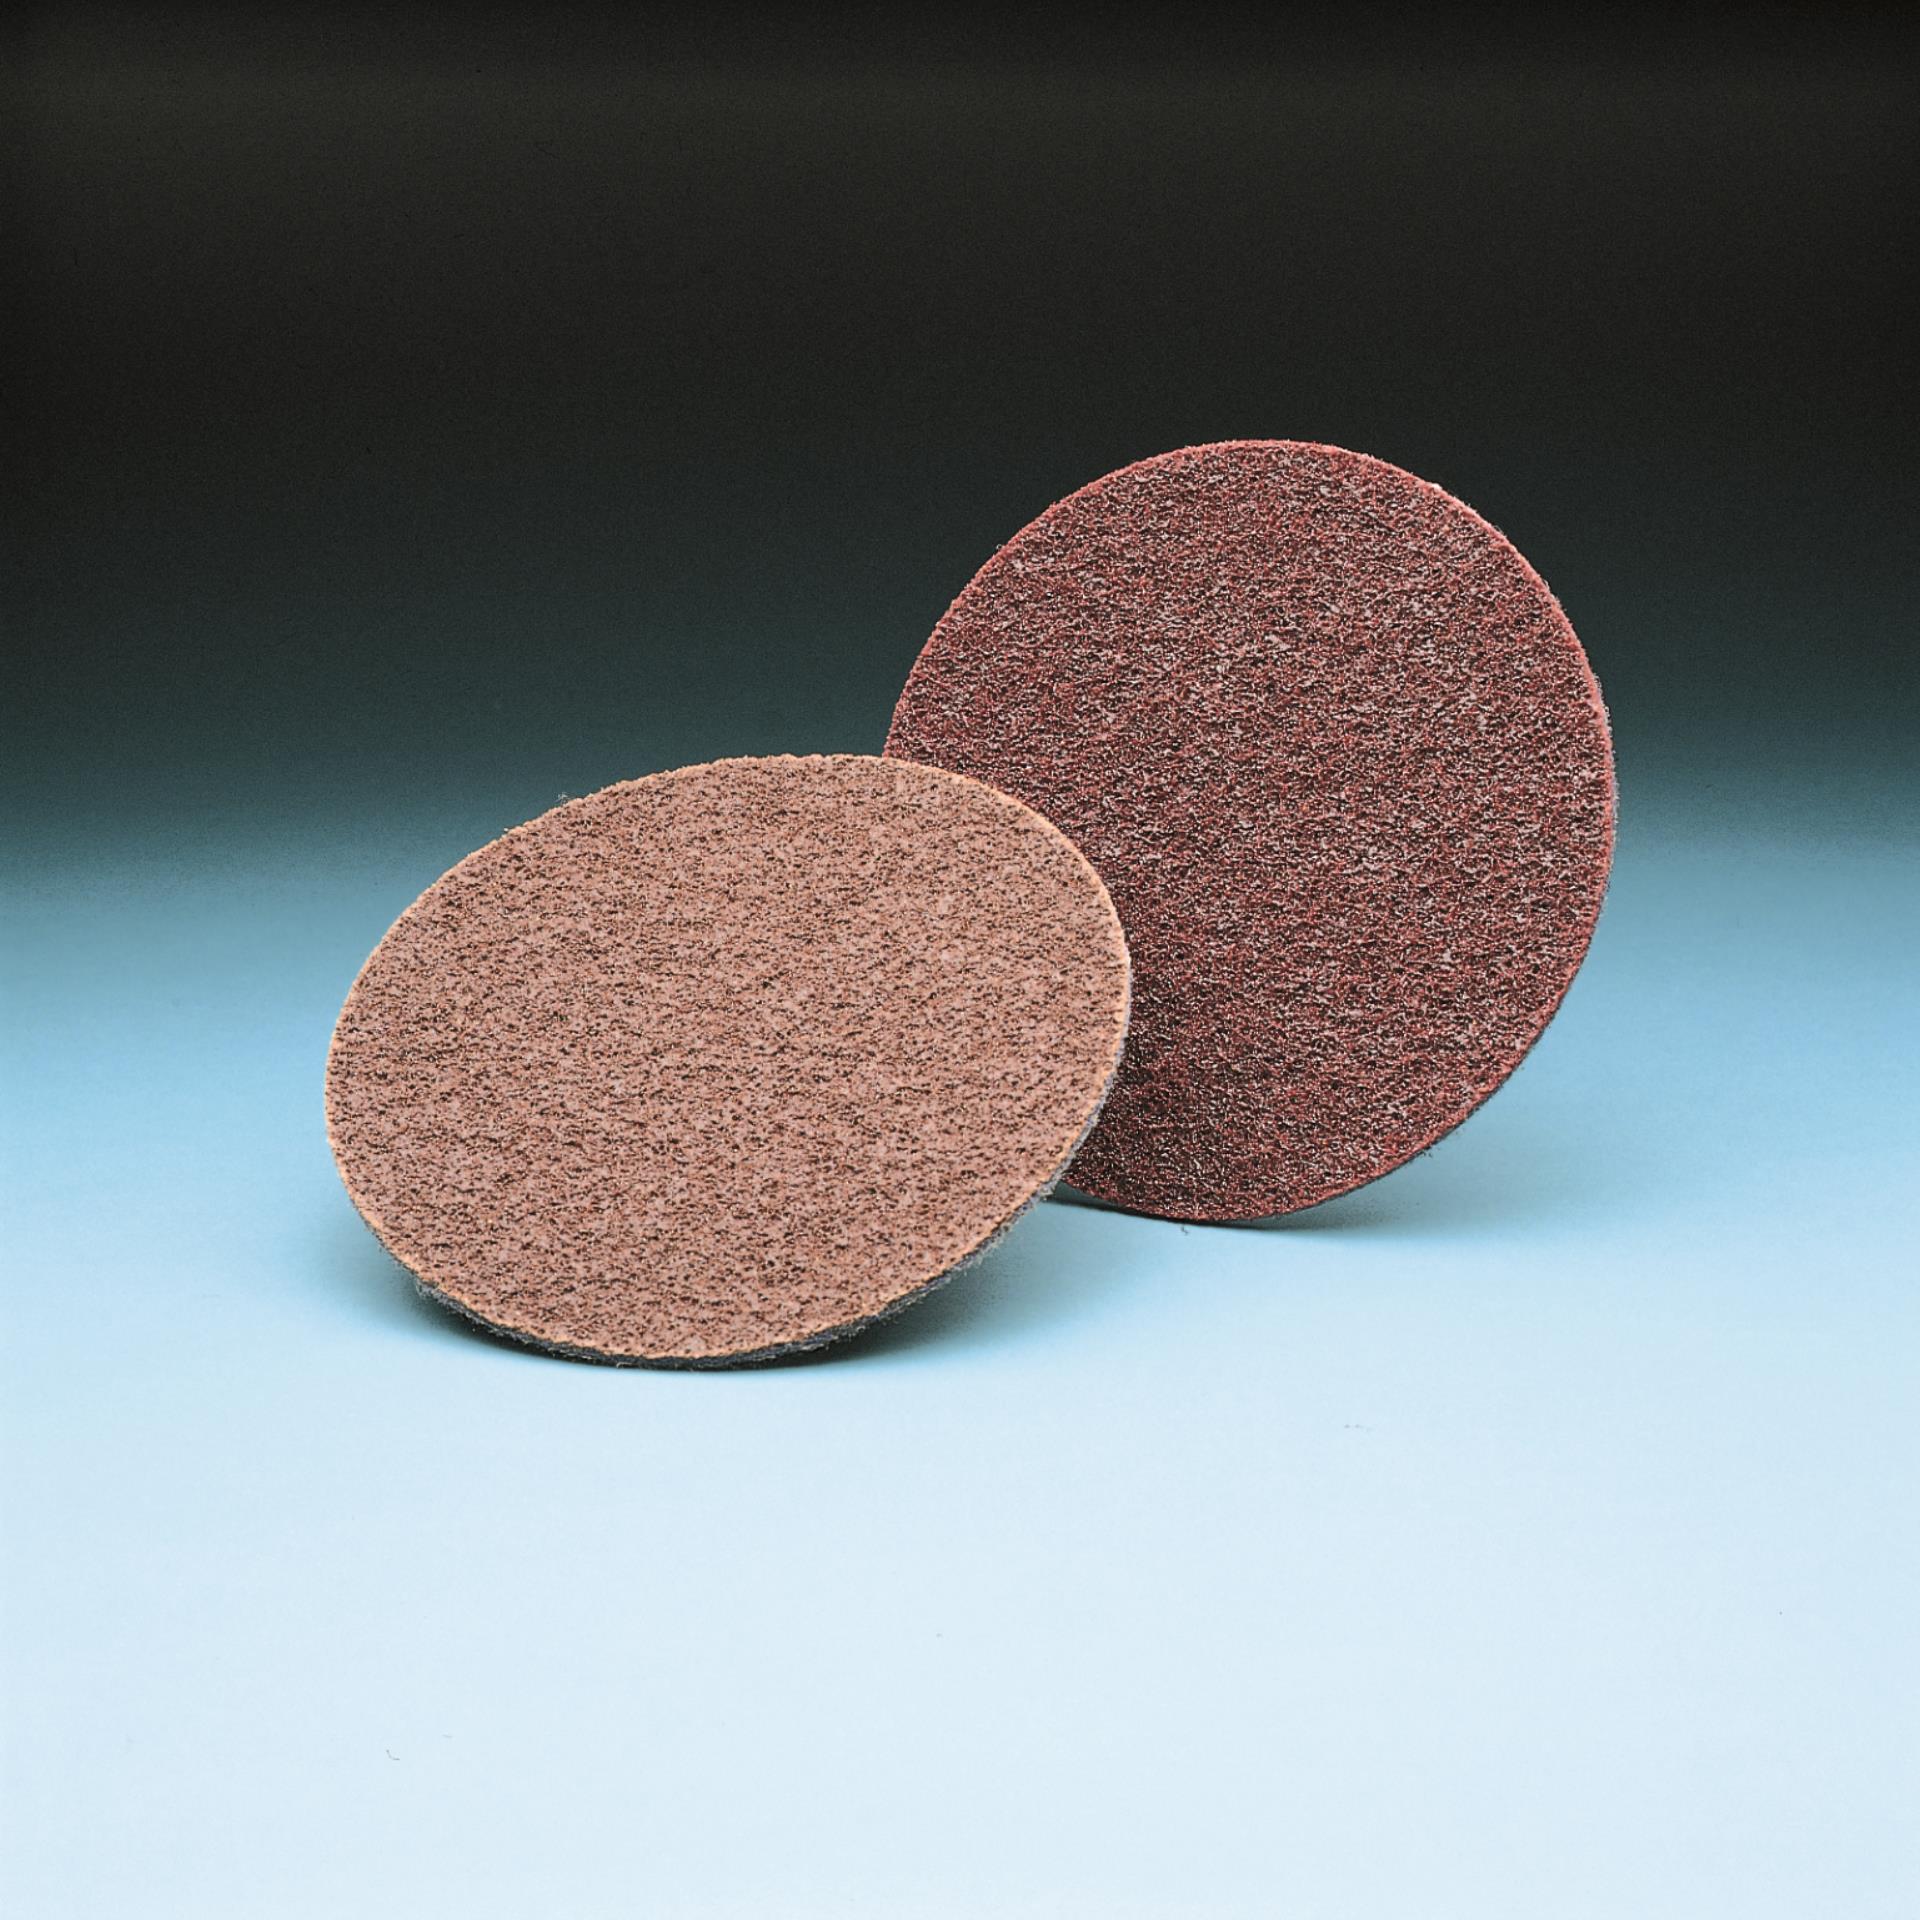 TS 3/4 Aluminum Oxide Standard Abrasives 840034 Coarse Quick-Change Surface Conditioning Disc Type RC 30 Units 